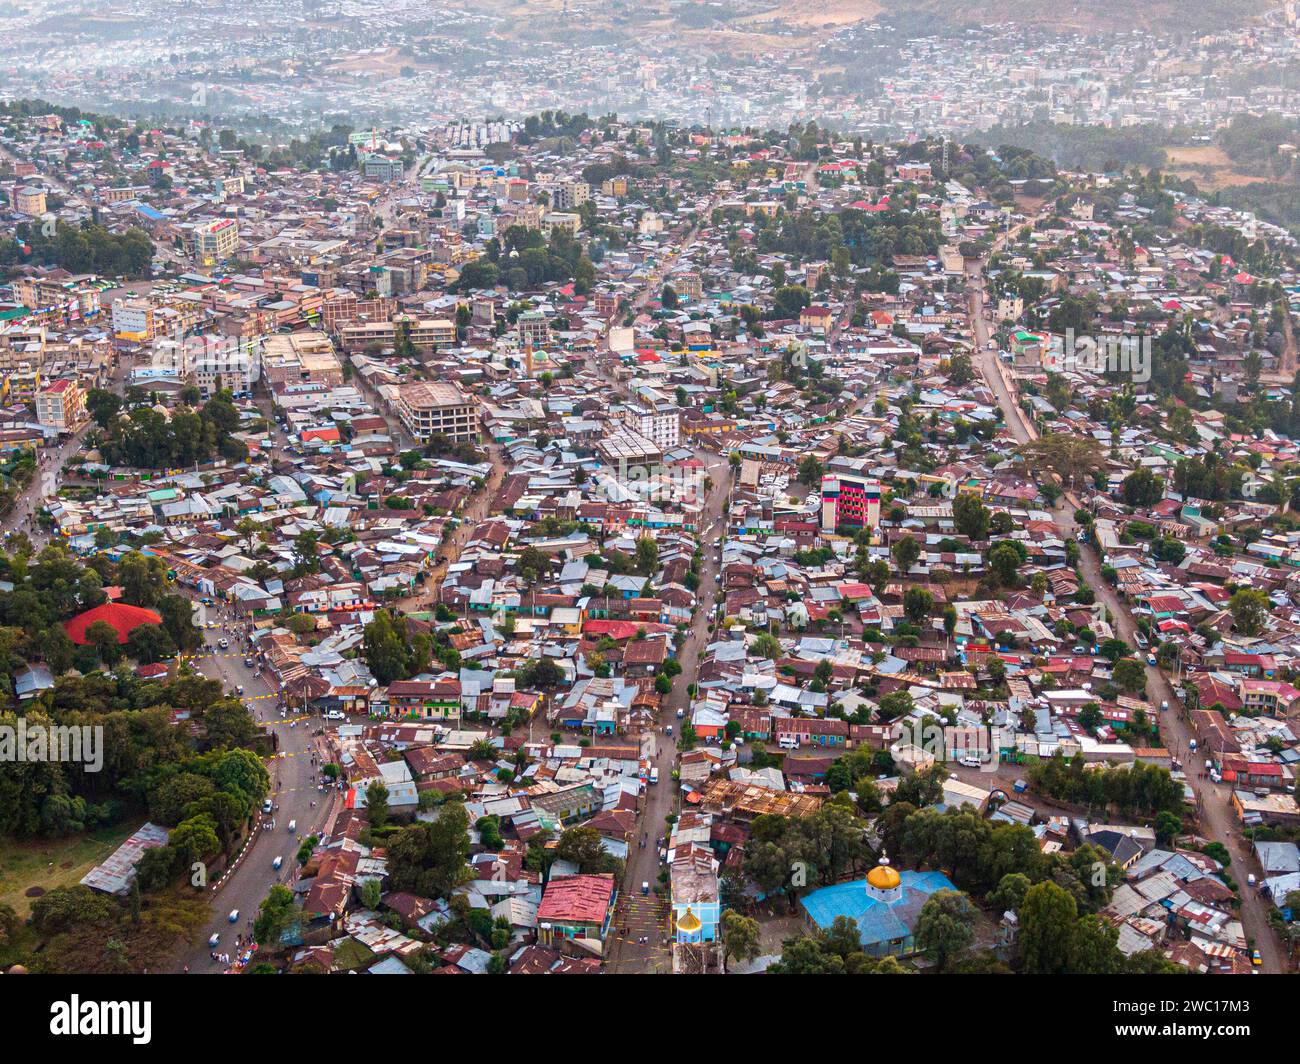 Aerial view of the city centre of Gondar with a lot of car and pedestrian traffic, Ethiopia, Africa Stock Photo